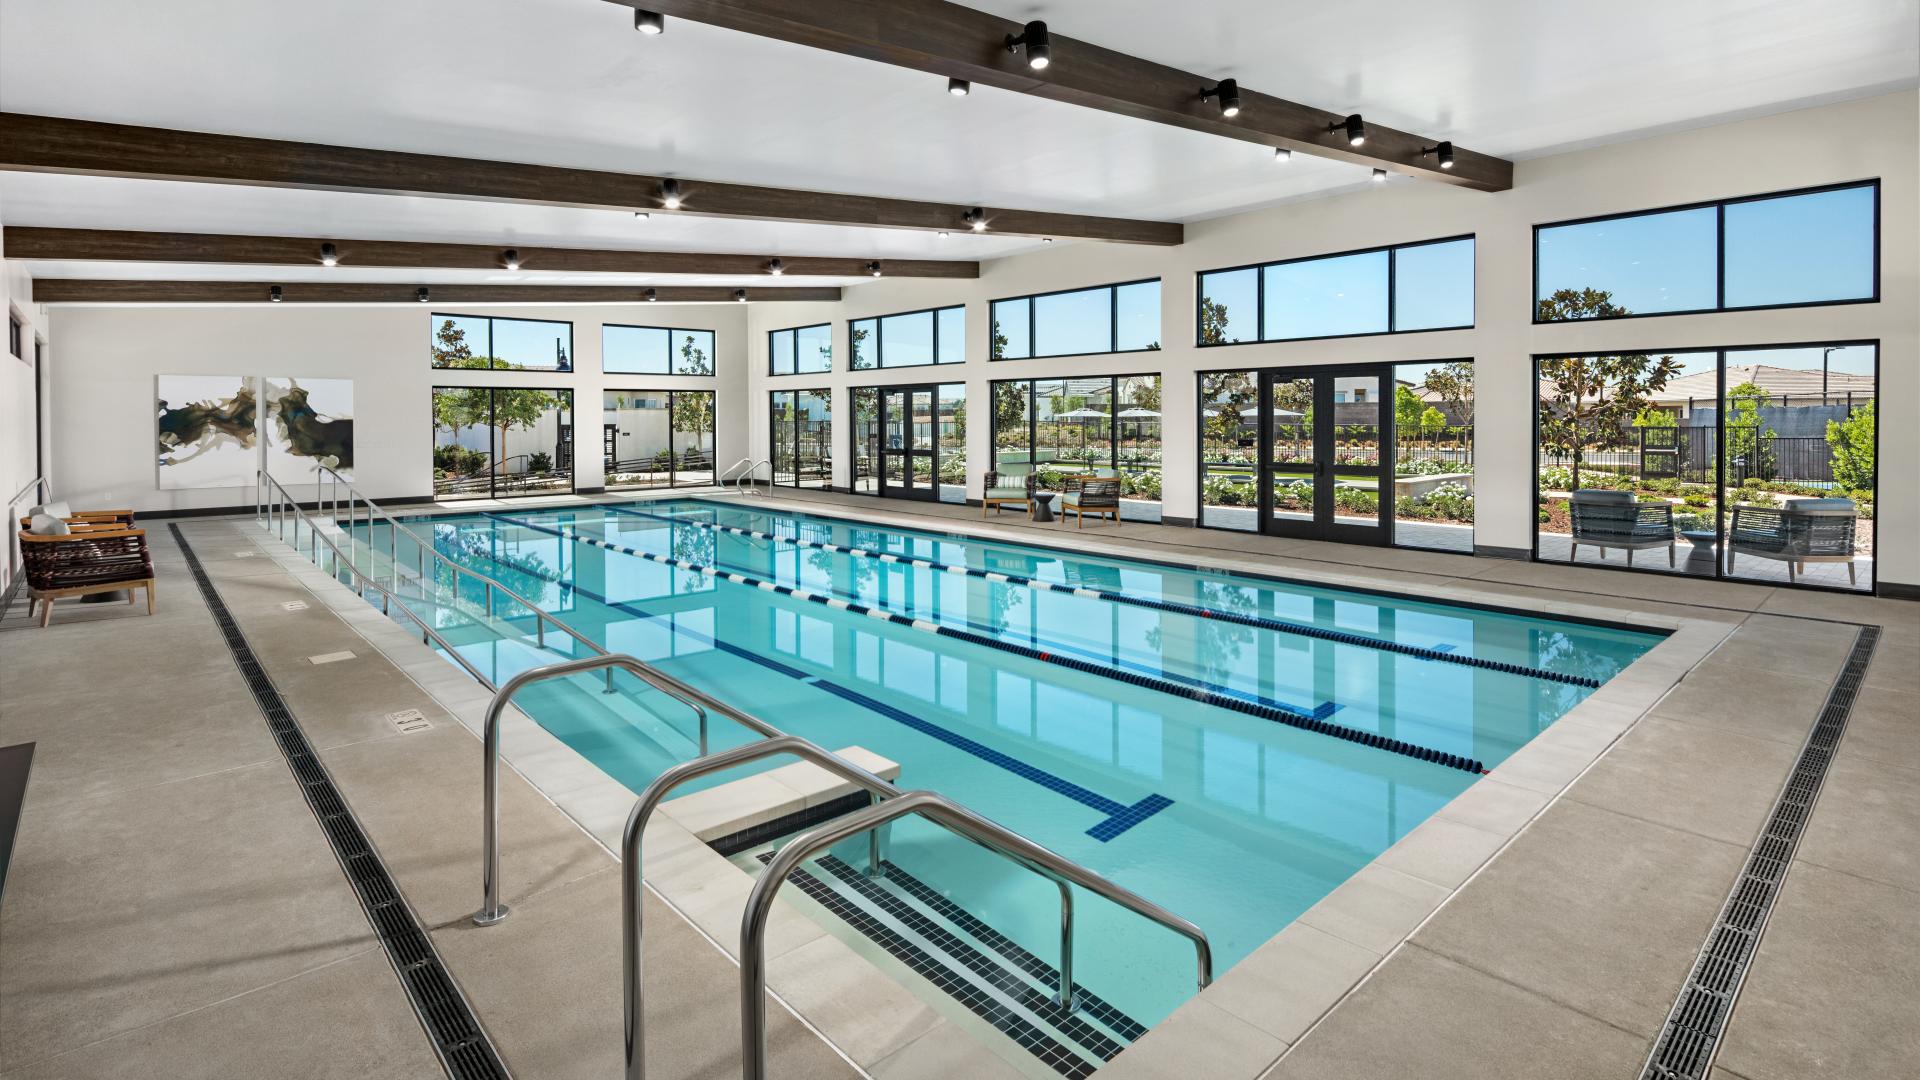 Swim all year with the indoor pool